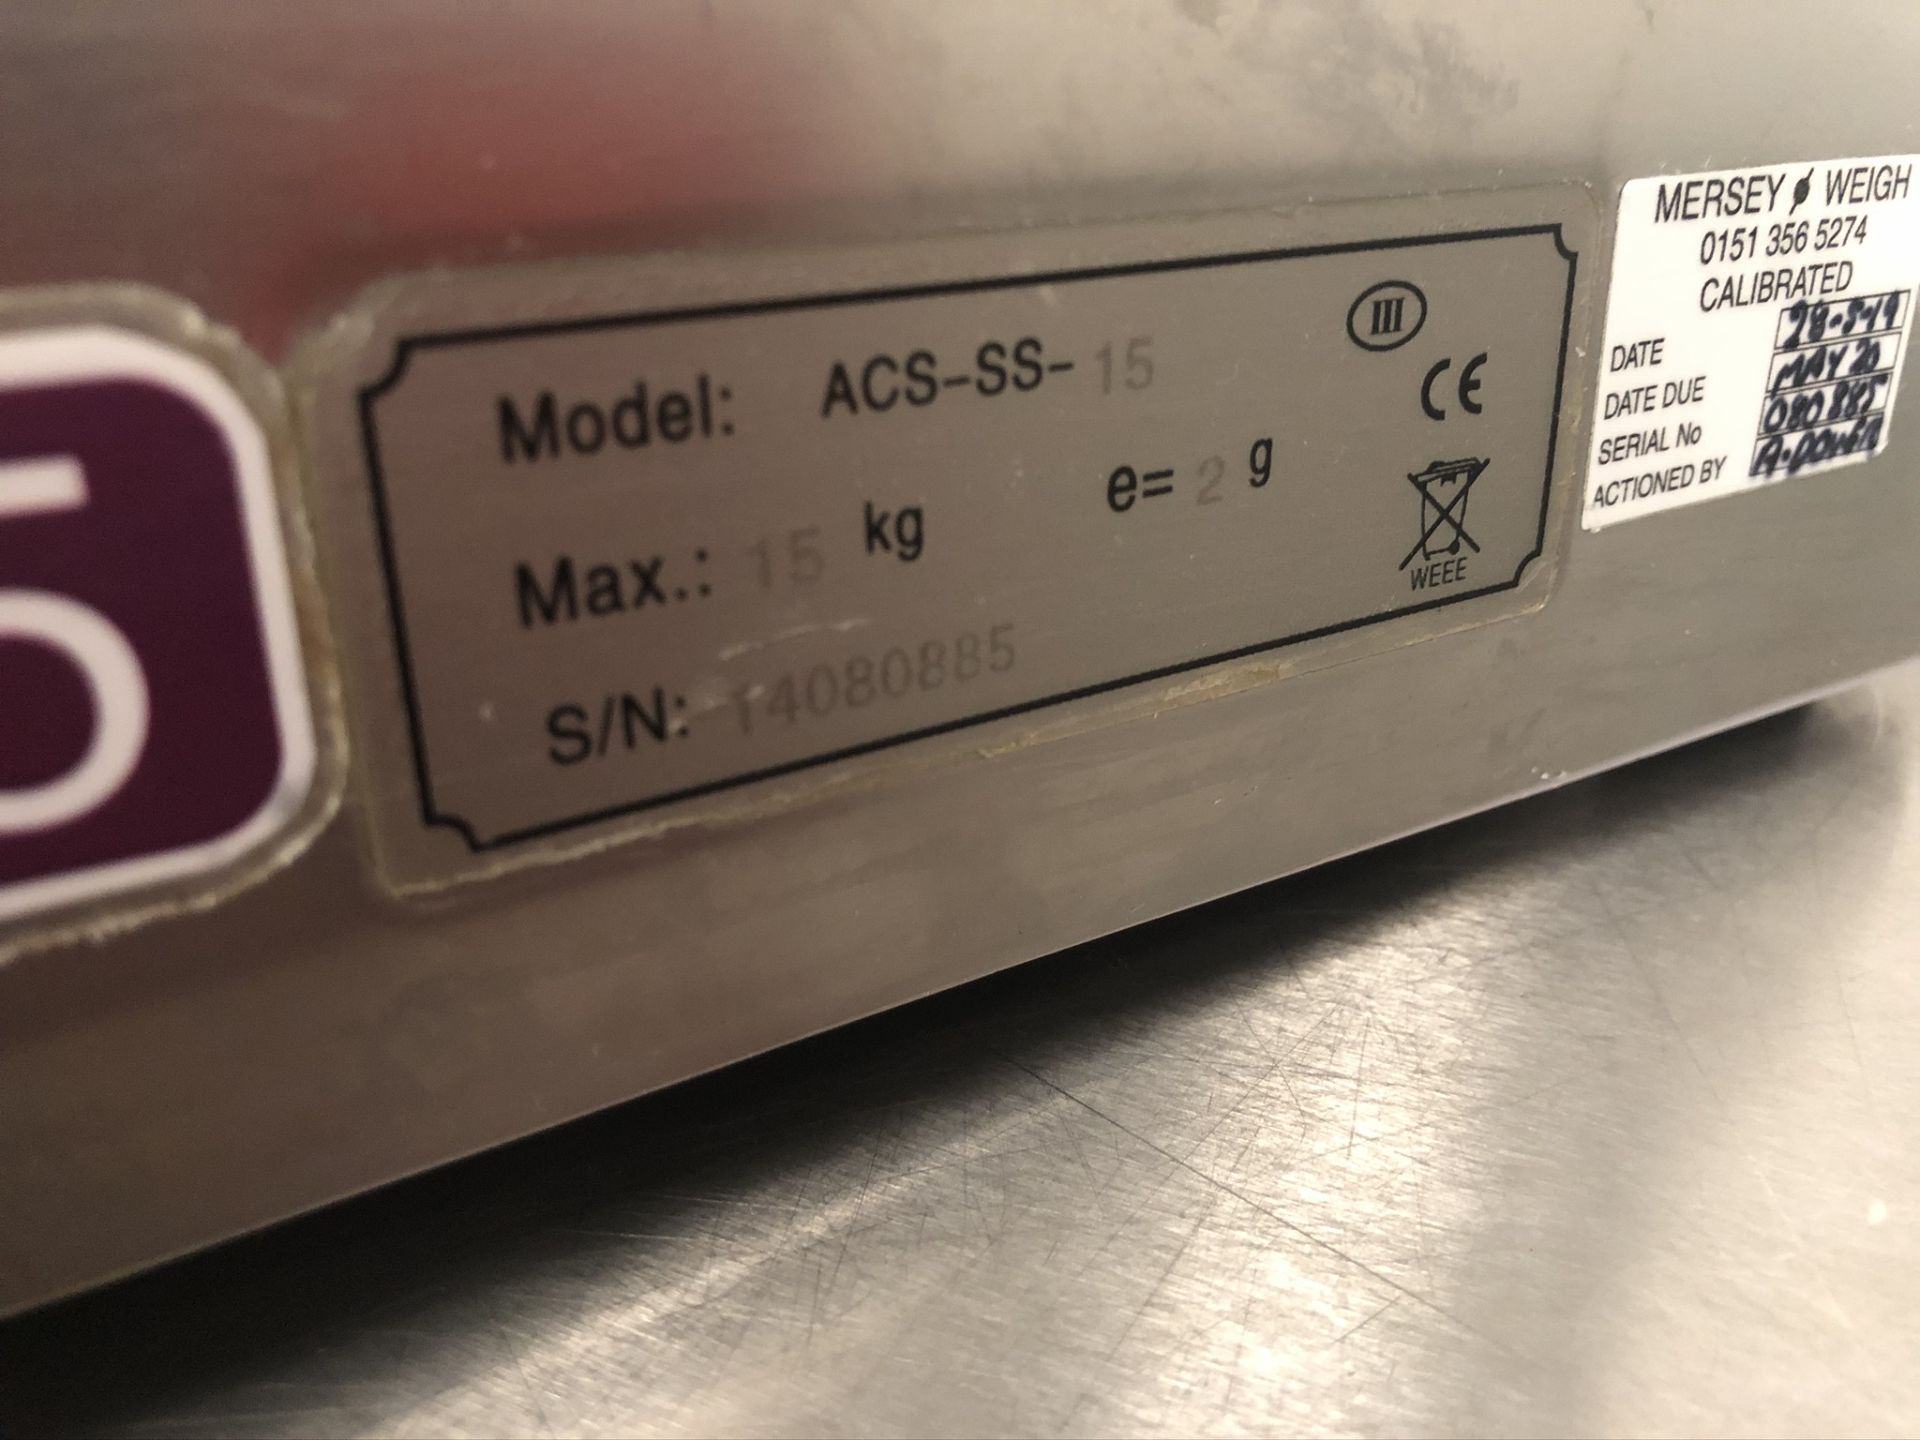 CSG ACS-SS-15 Digital Weighing Scales - Image 3 of 3